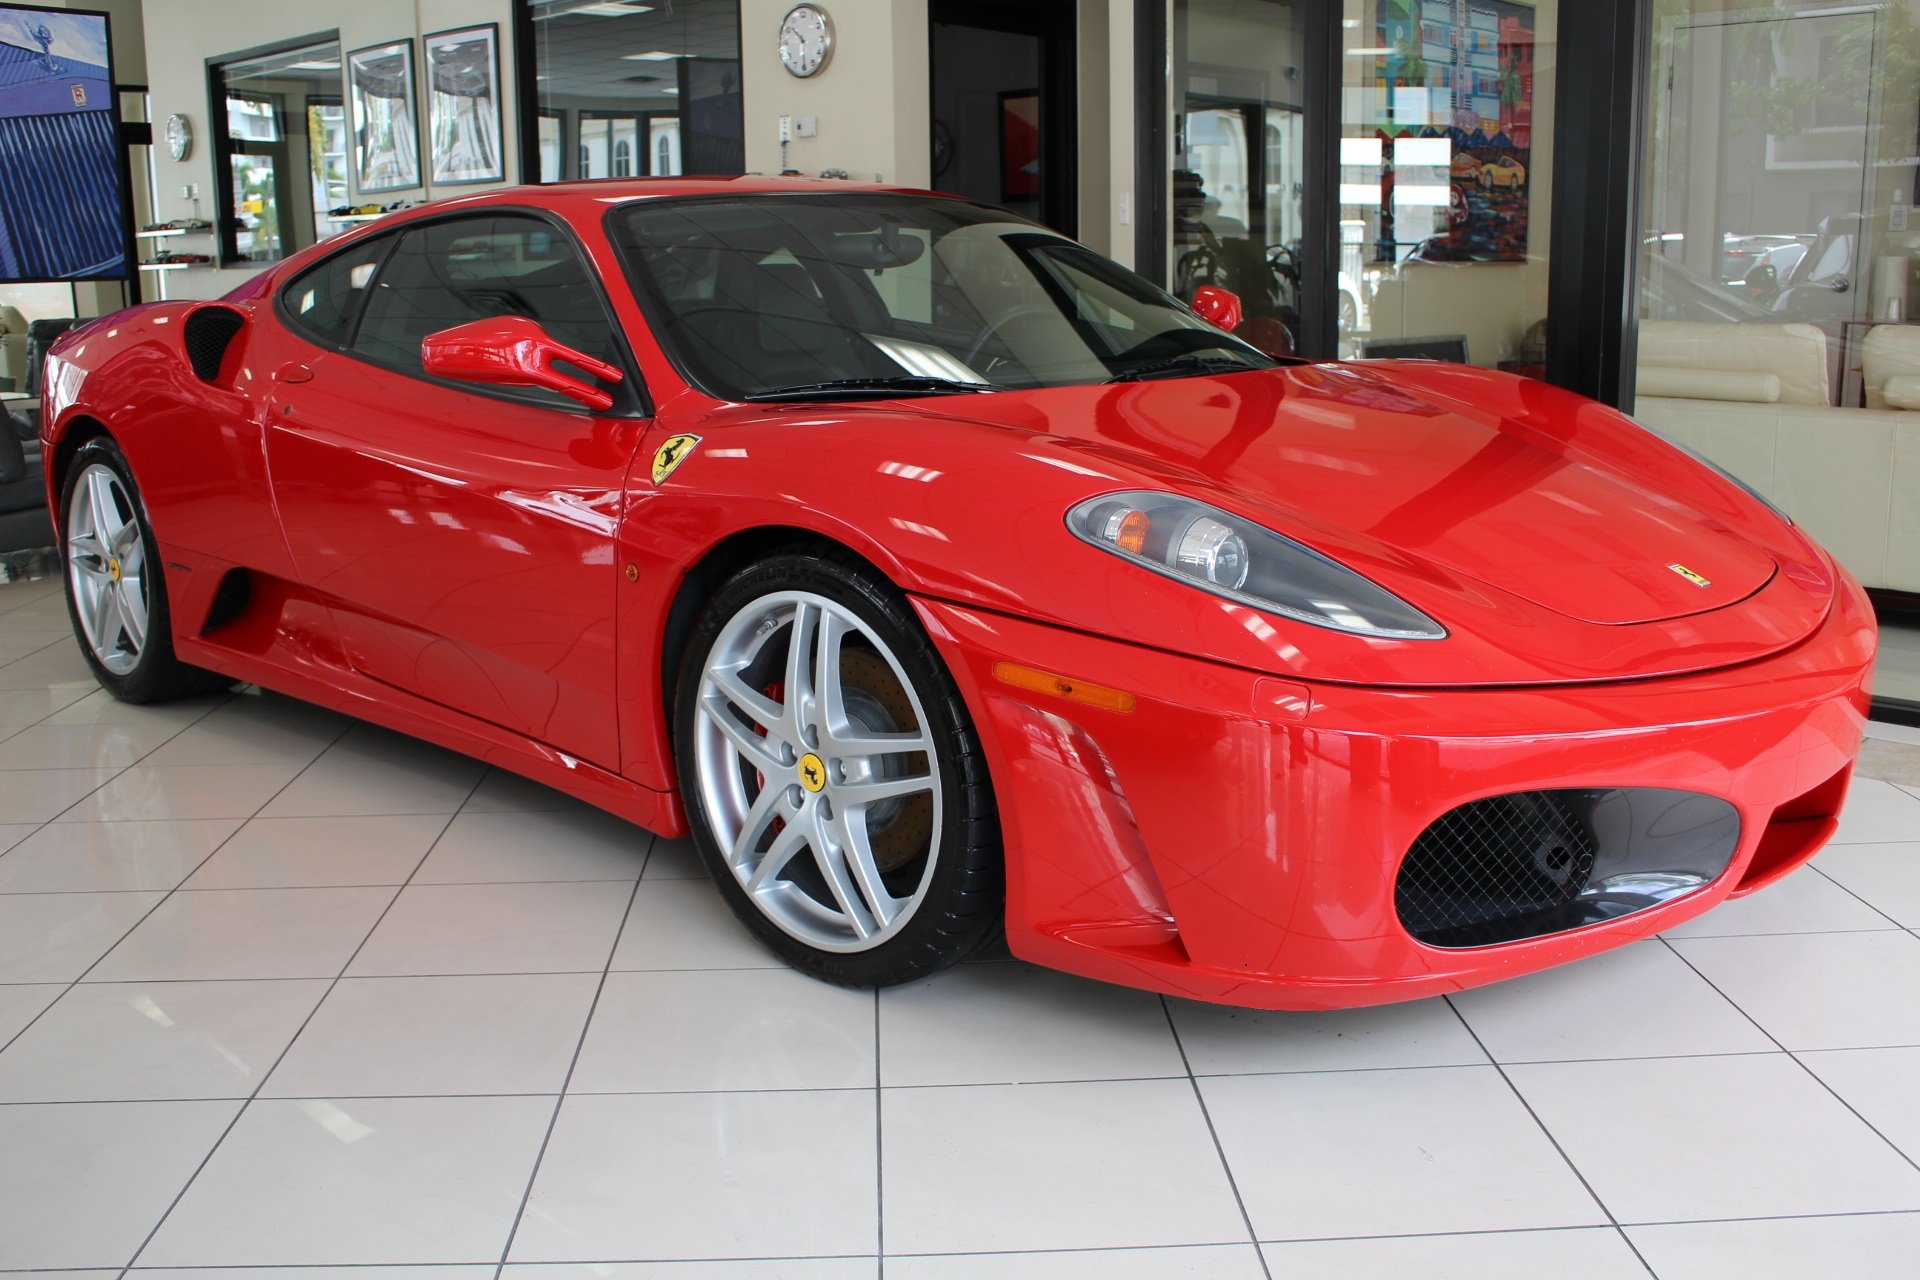 Used 2005 Ferrari F430 for sale Sold at The Gables Sports Cars in Miami FL 33146 1